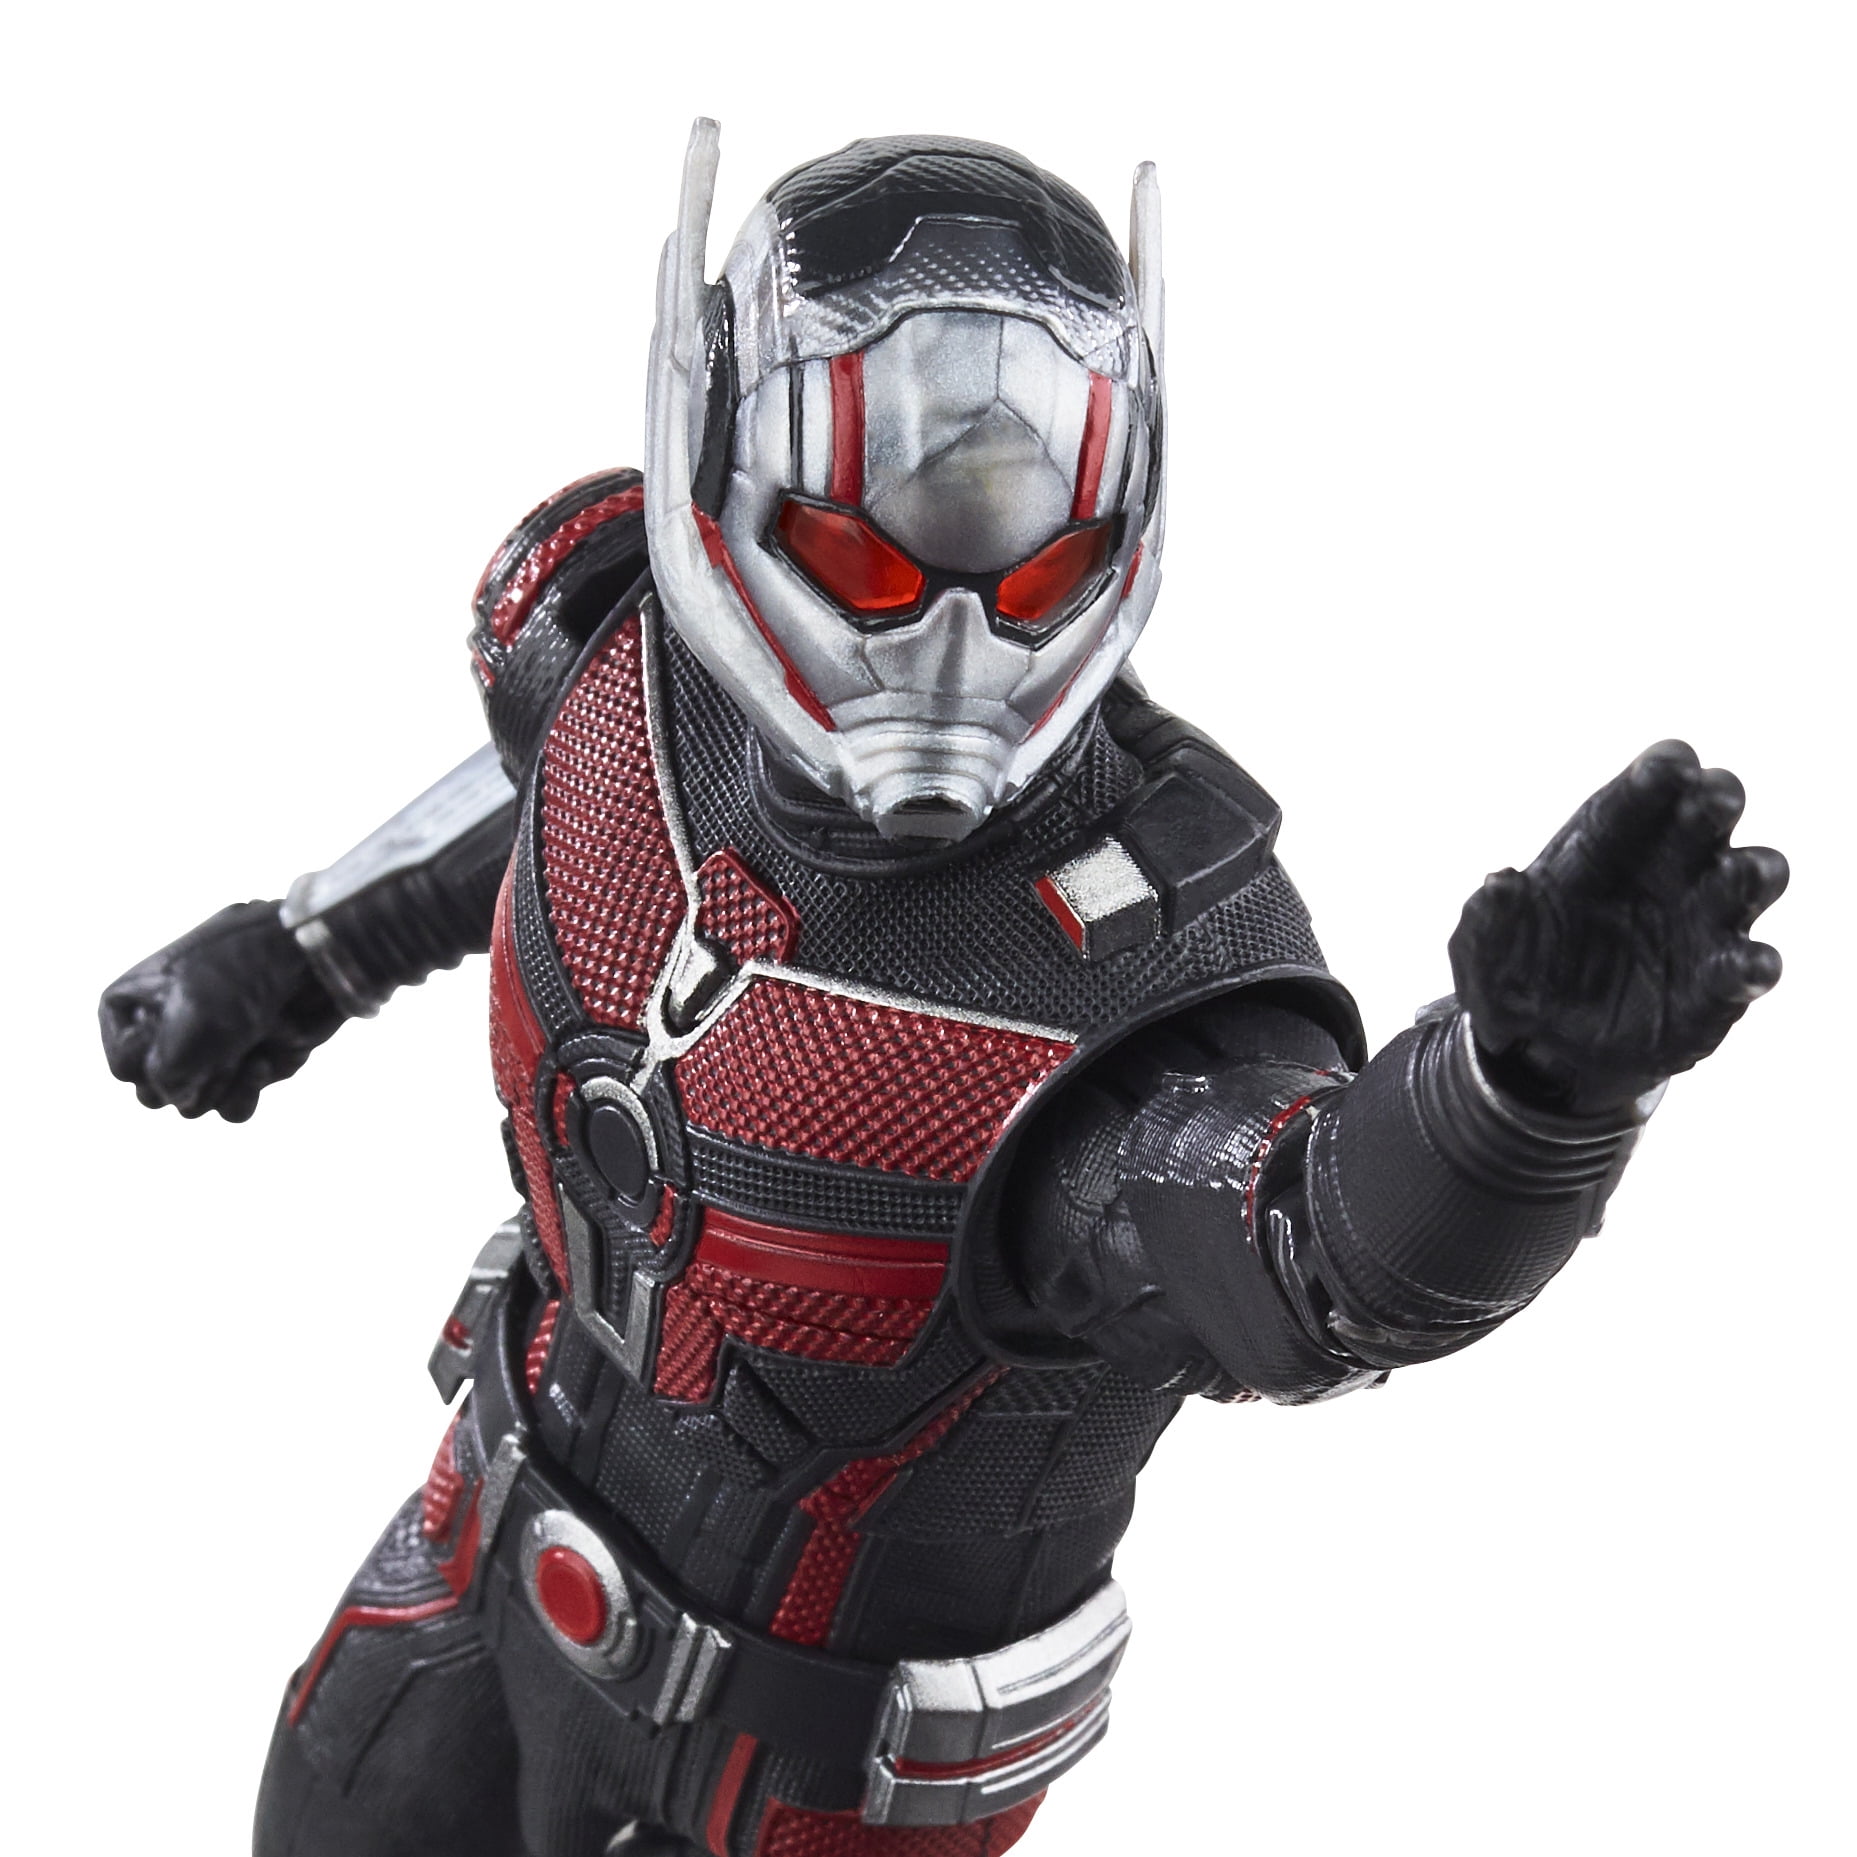  Marvel Legends Series Ant-Man,Ant-Man & The Wasp: Quantumania  Collectible 6-Inch Action Figures, Ages 4 and Up : Toys & Games